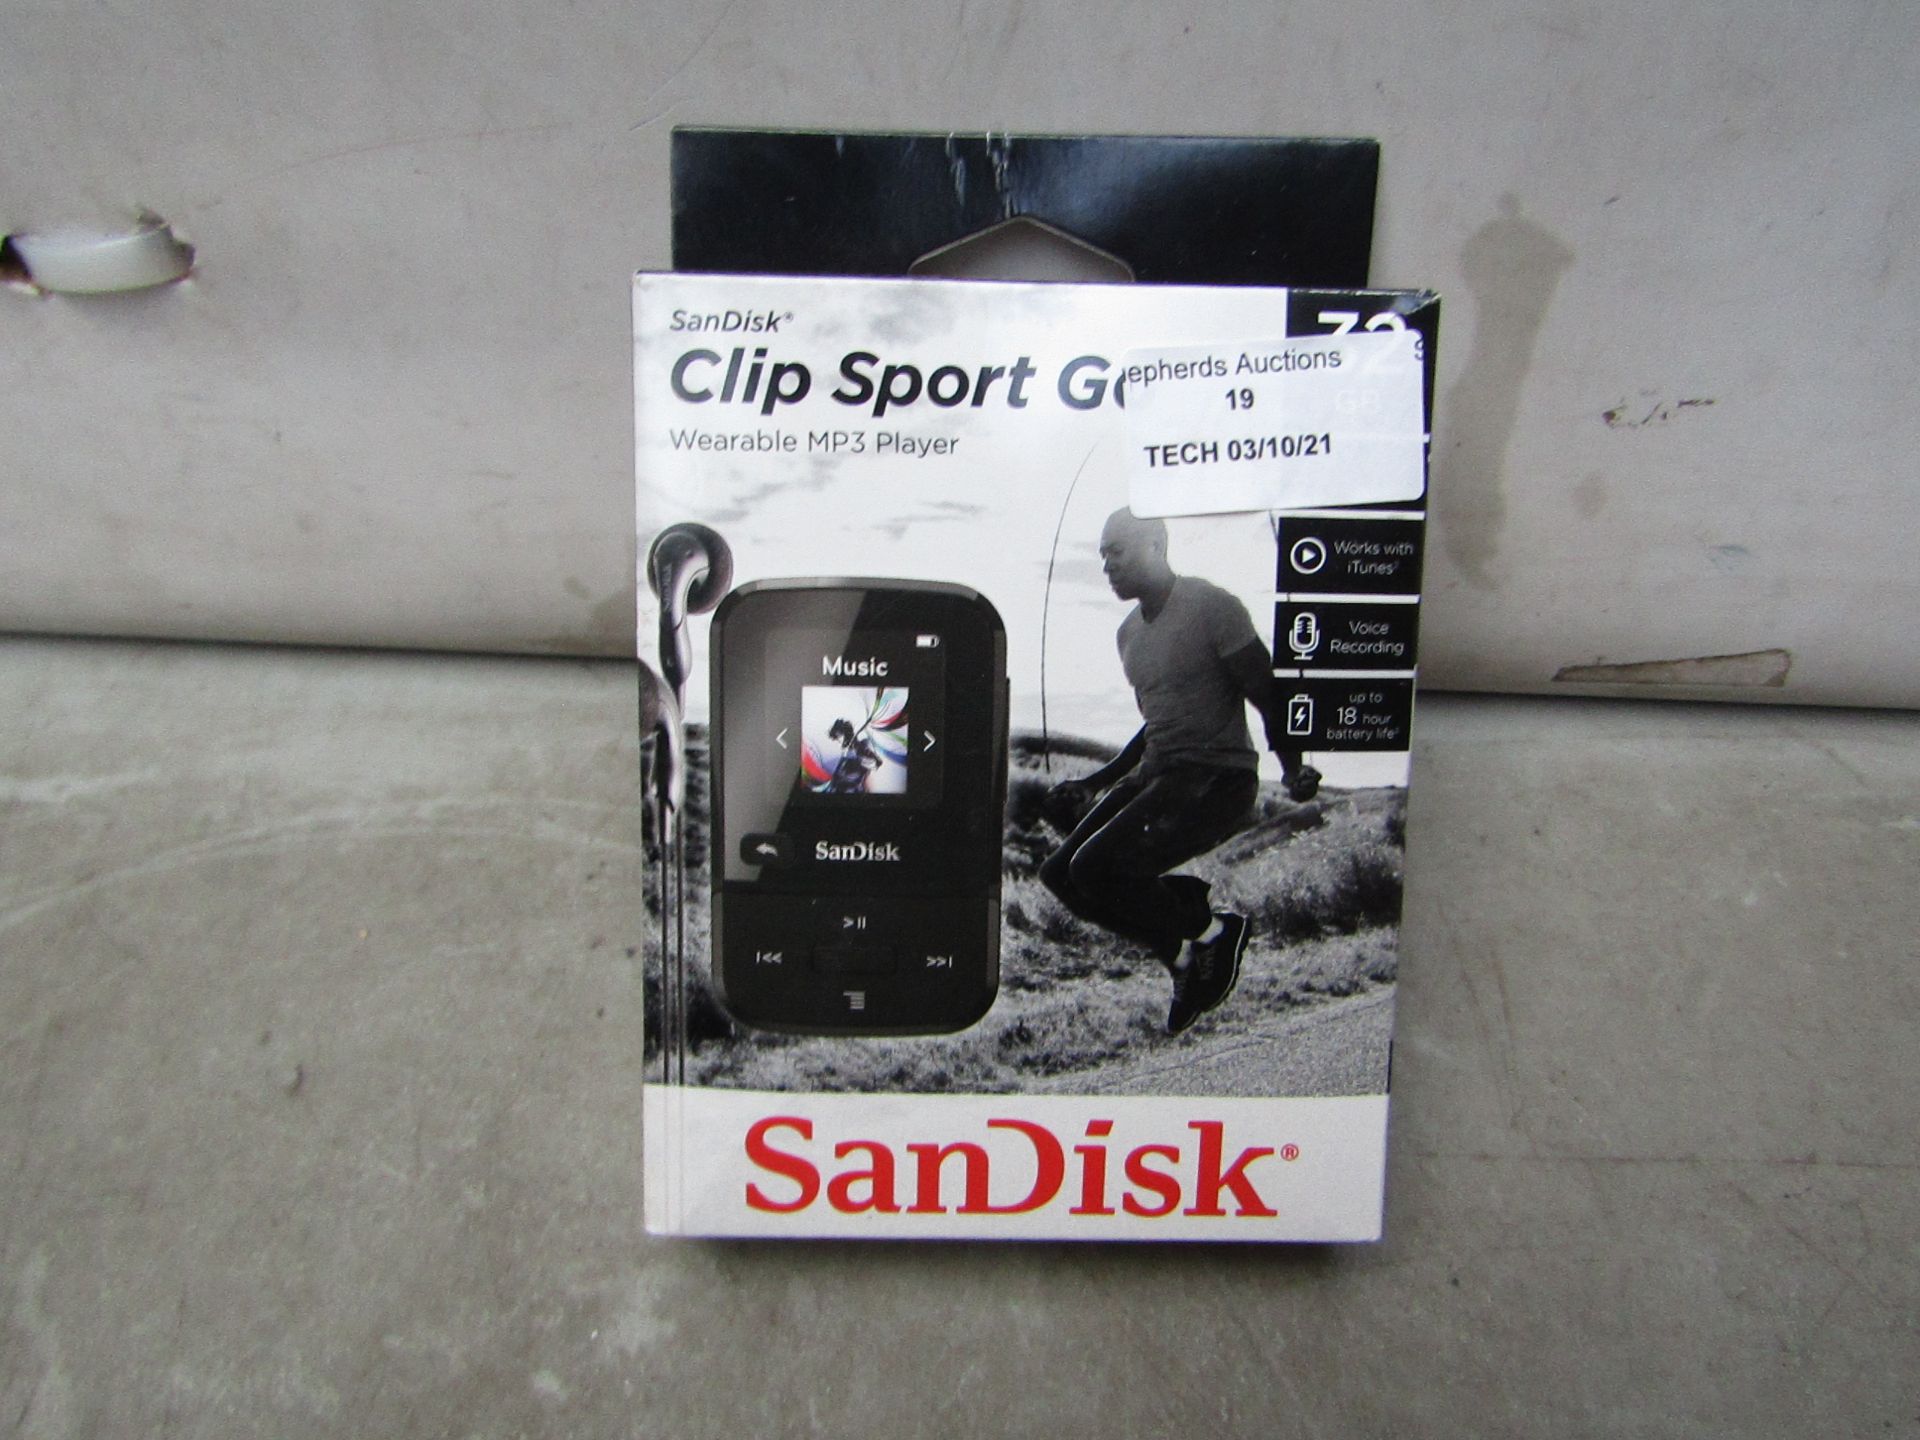 Sandisk Clip Sport Go Wearable MP3 Player - Untested & Boxed - RRP £41